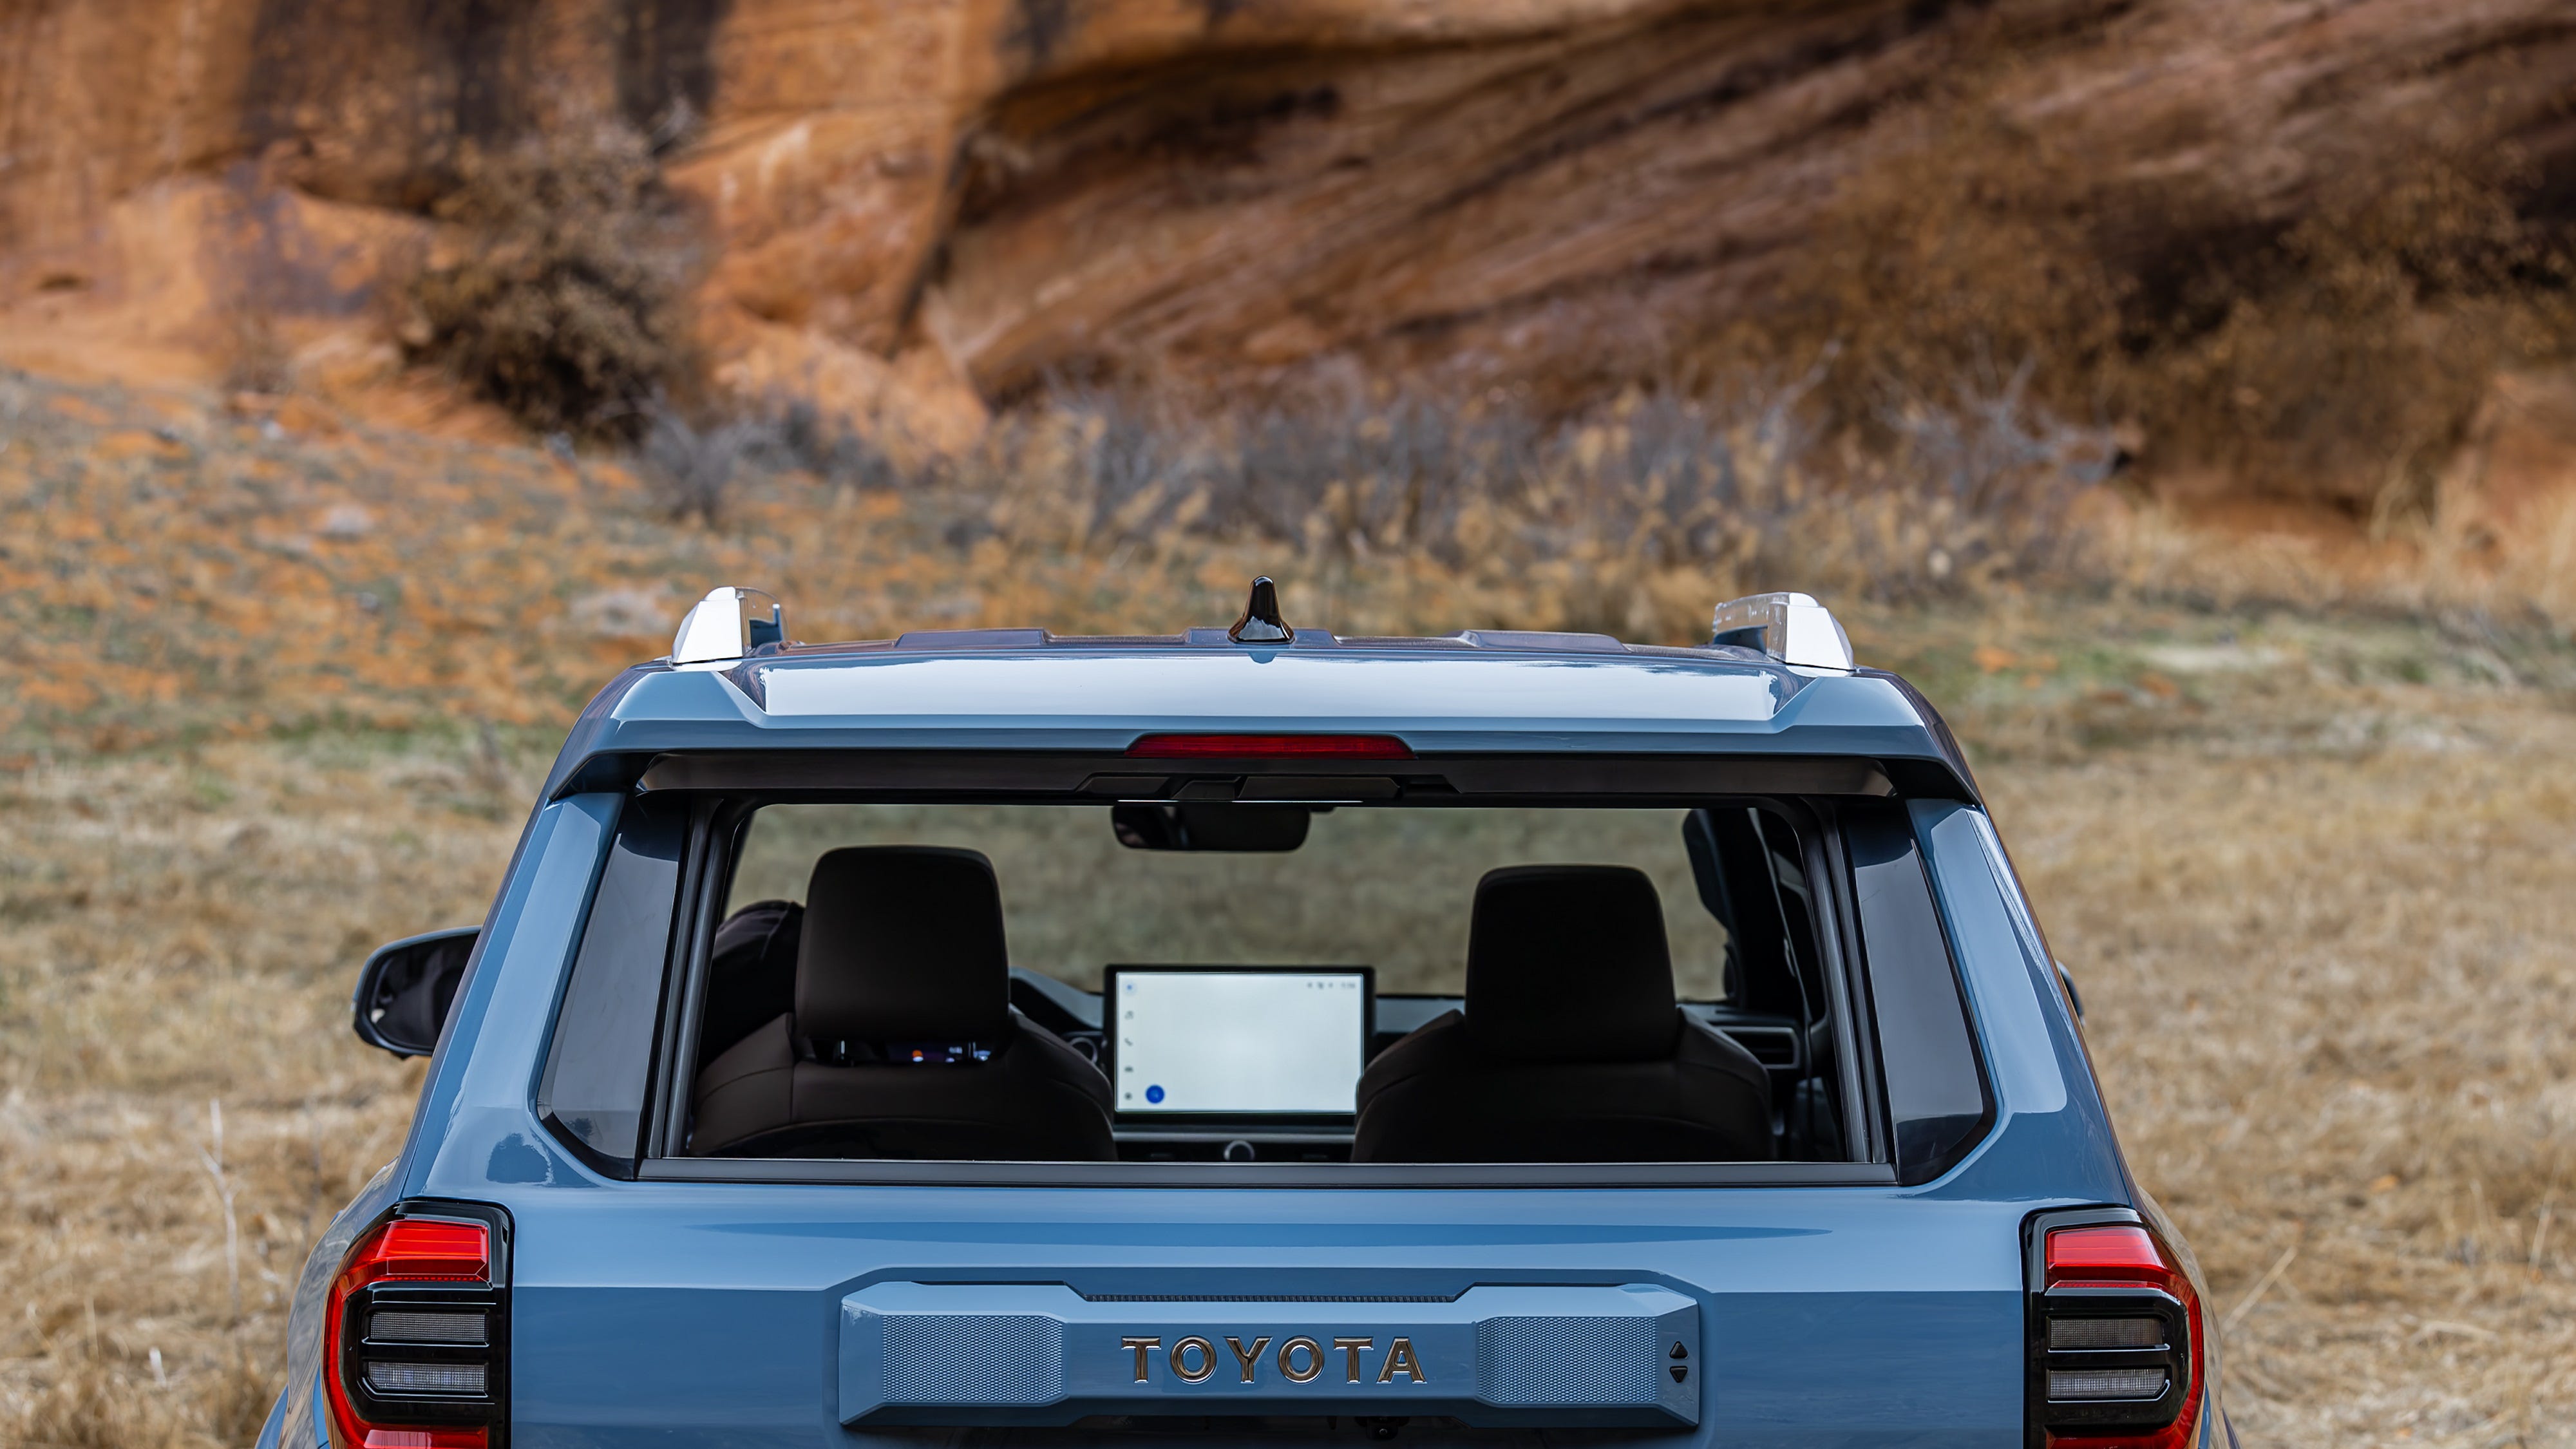 <p>Visually, Toyota says the new 4Runner takes inspiration from the desert racing scene, but its design also recalls the vehicle's earliest models. The 2025 model includes the classic roll-down rear window, as well as a "wrap over" rear-quarter window that extends to the roof, like on the first and second-generation 4Runners from the 1980s.</p><p>The Trailhunter model also comes with a heritage grill with vintage-style Toyota lettering.</p>